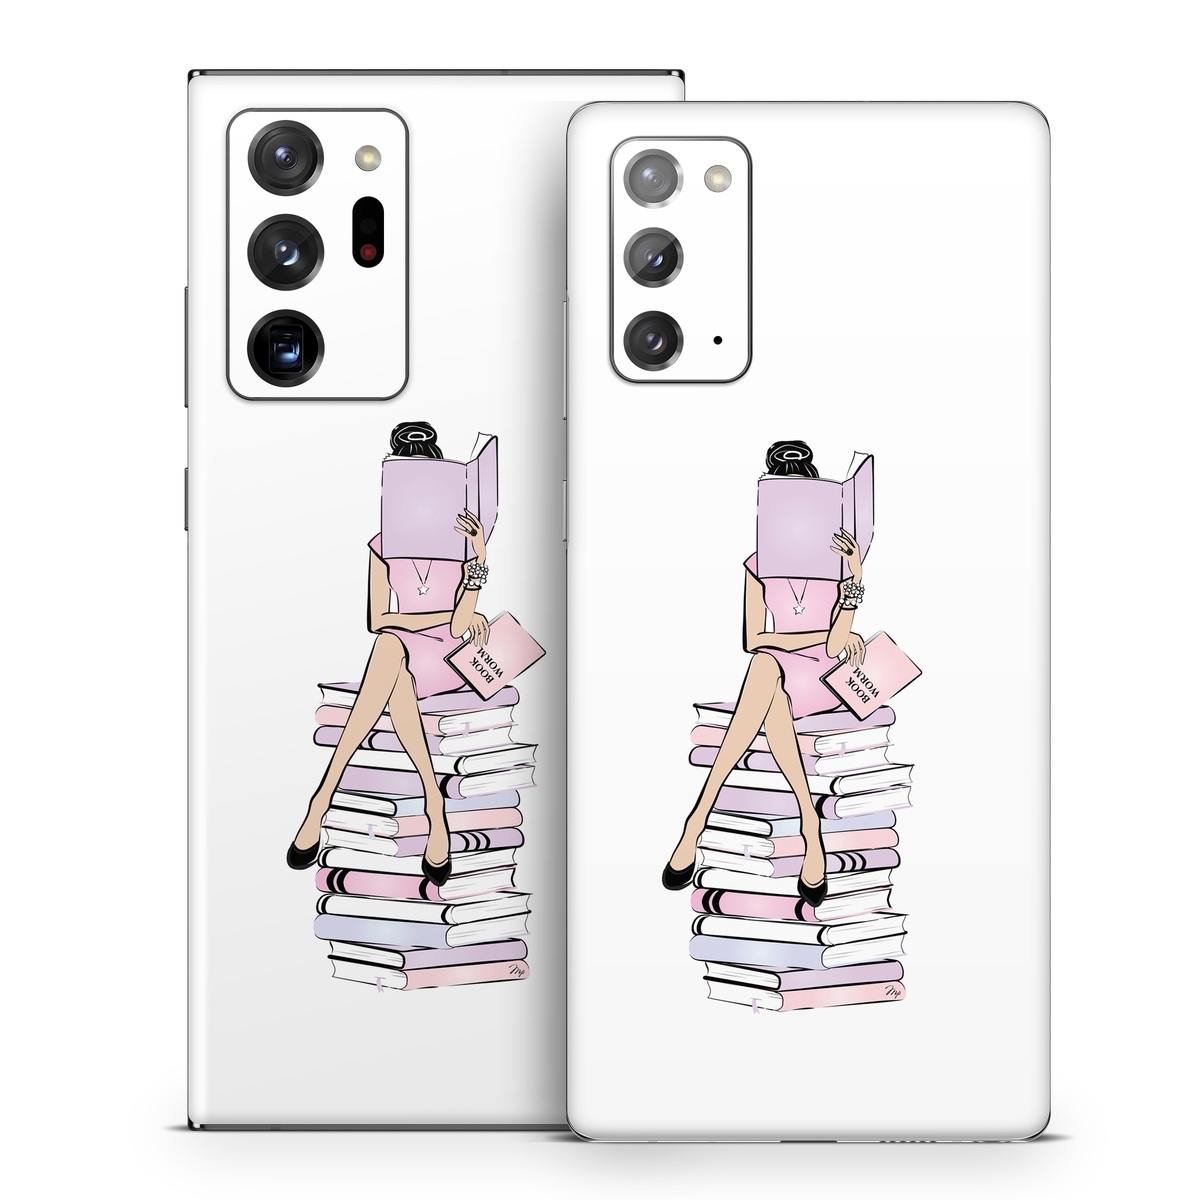 Samsung Galaxy Note 20 Series Skin design of Gesture, Art, Cartoon, Font, Drawing, Illustration, Painting, Fictional character, Animation, Diagram, with black, white, pink, purple, blue, yellow, brown colors